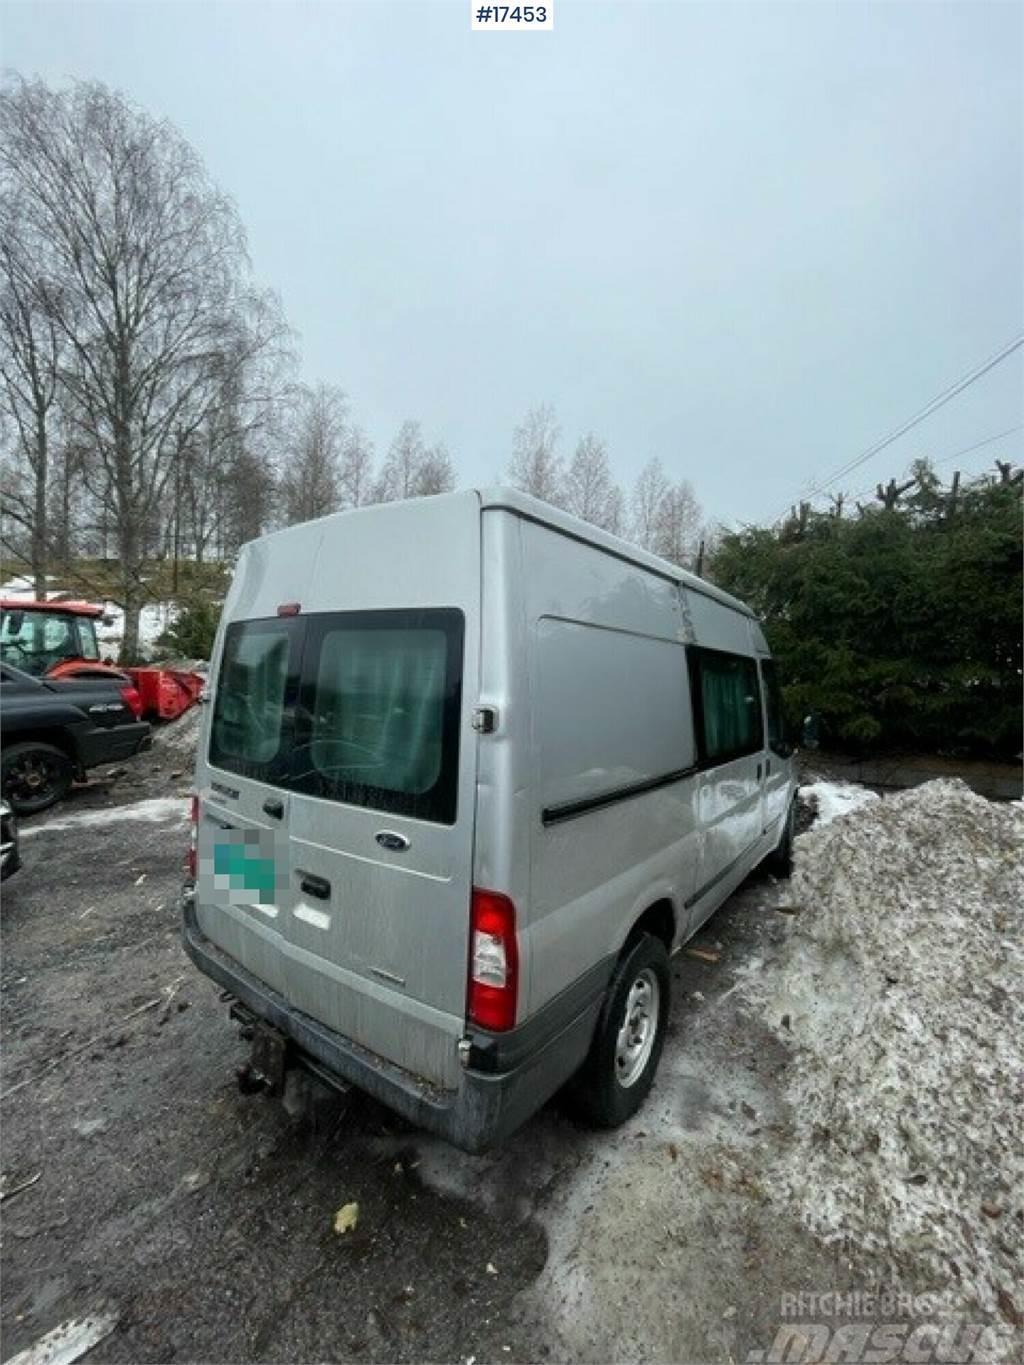 Ford Transit 4x4. Rep object. Busy / Vany